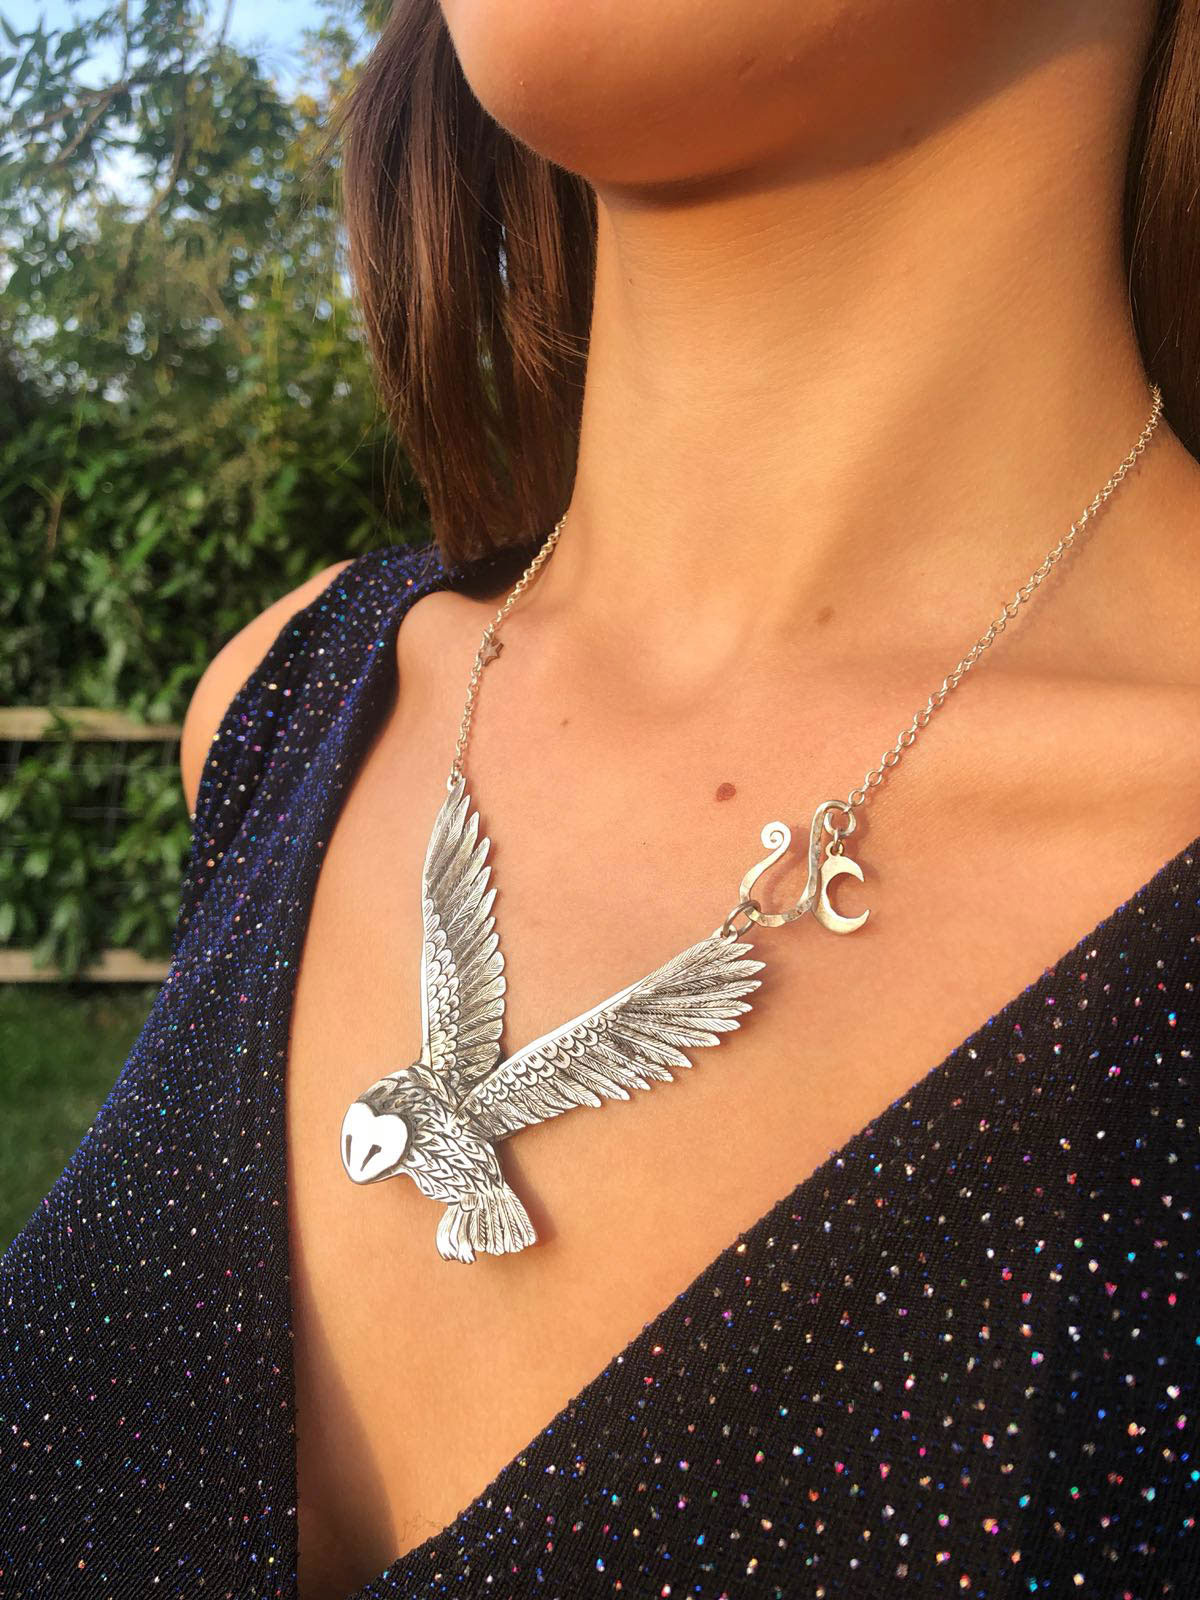 Owl jewellery - ethical handcrafted and recycled jewellery made by independent artisan workshop in Cambridge England